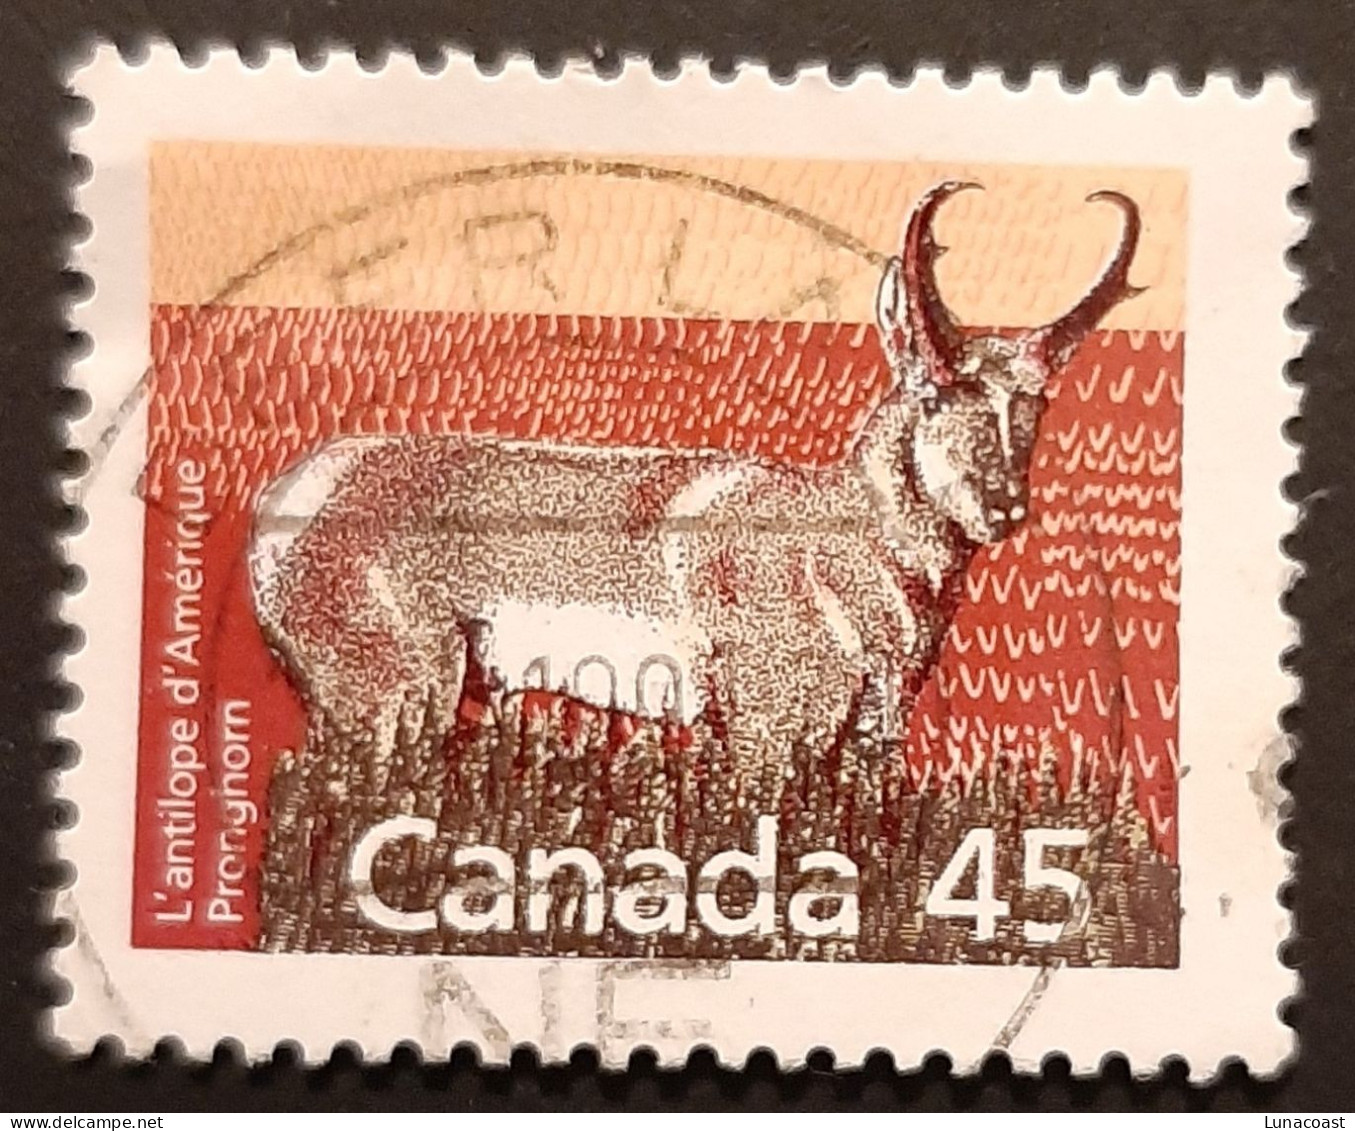 Canada 1990 USED Sc.#1172d  45c,  Perf. 13.1  Pronghorn - Usados